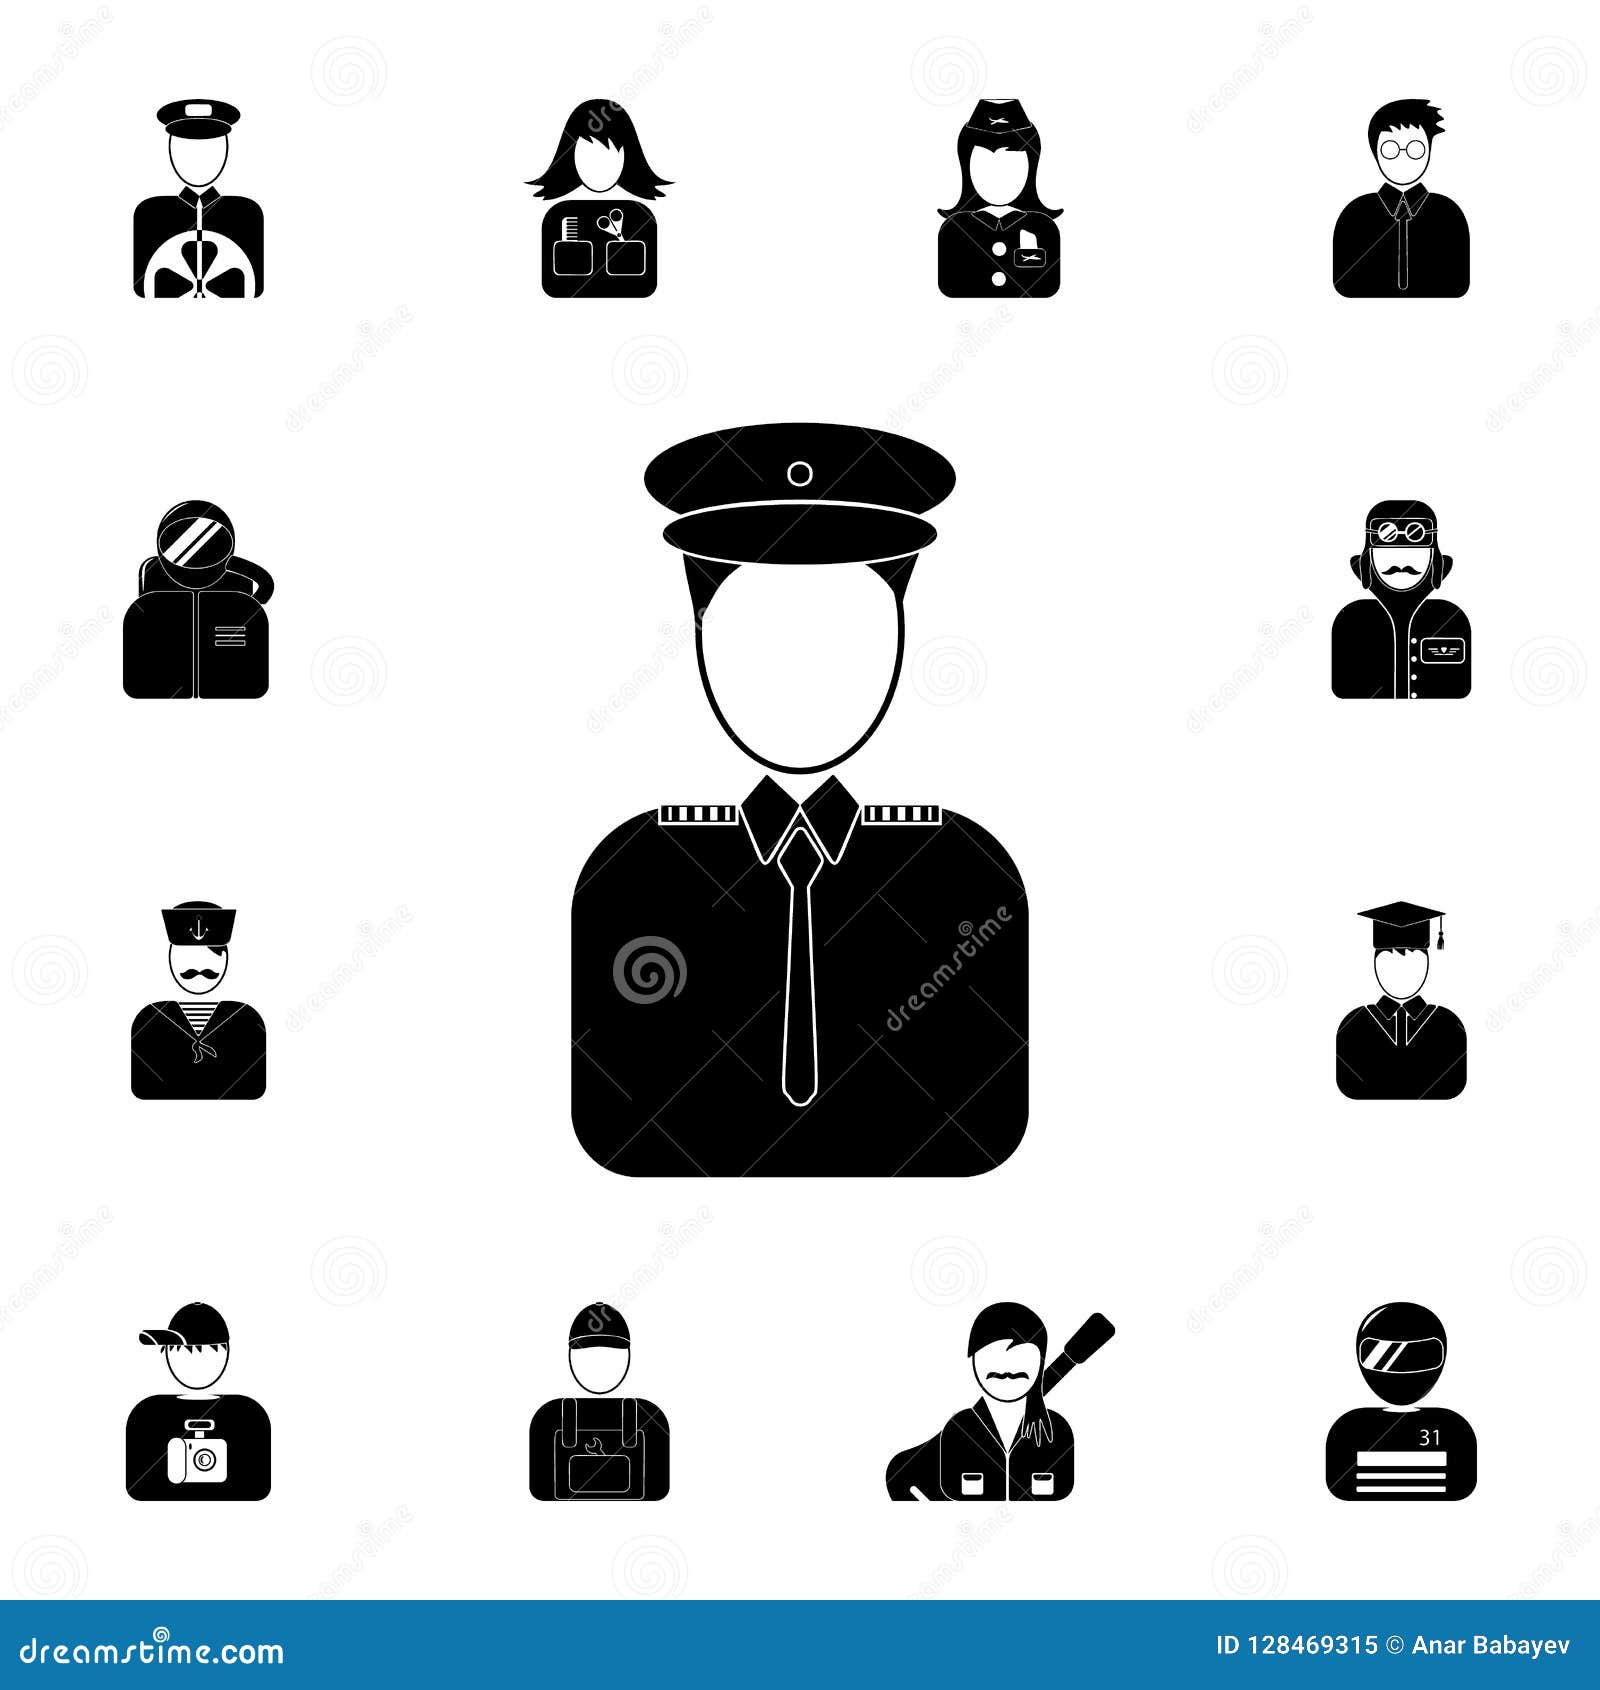 Download The Doorman's Avatar Icon. Detailed Set Of Avatars Of Profession Icons. Premium Quality Graphic ...